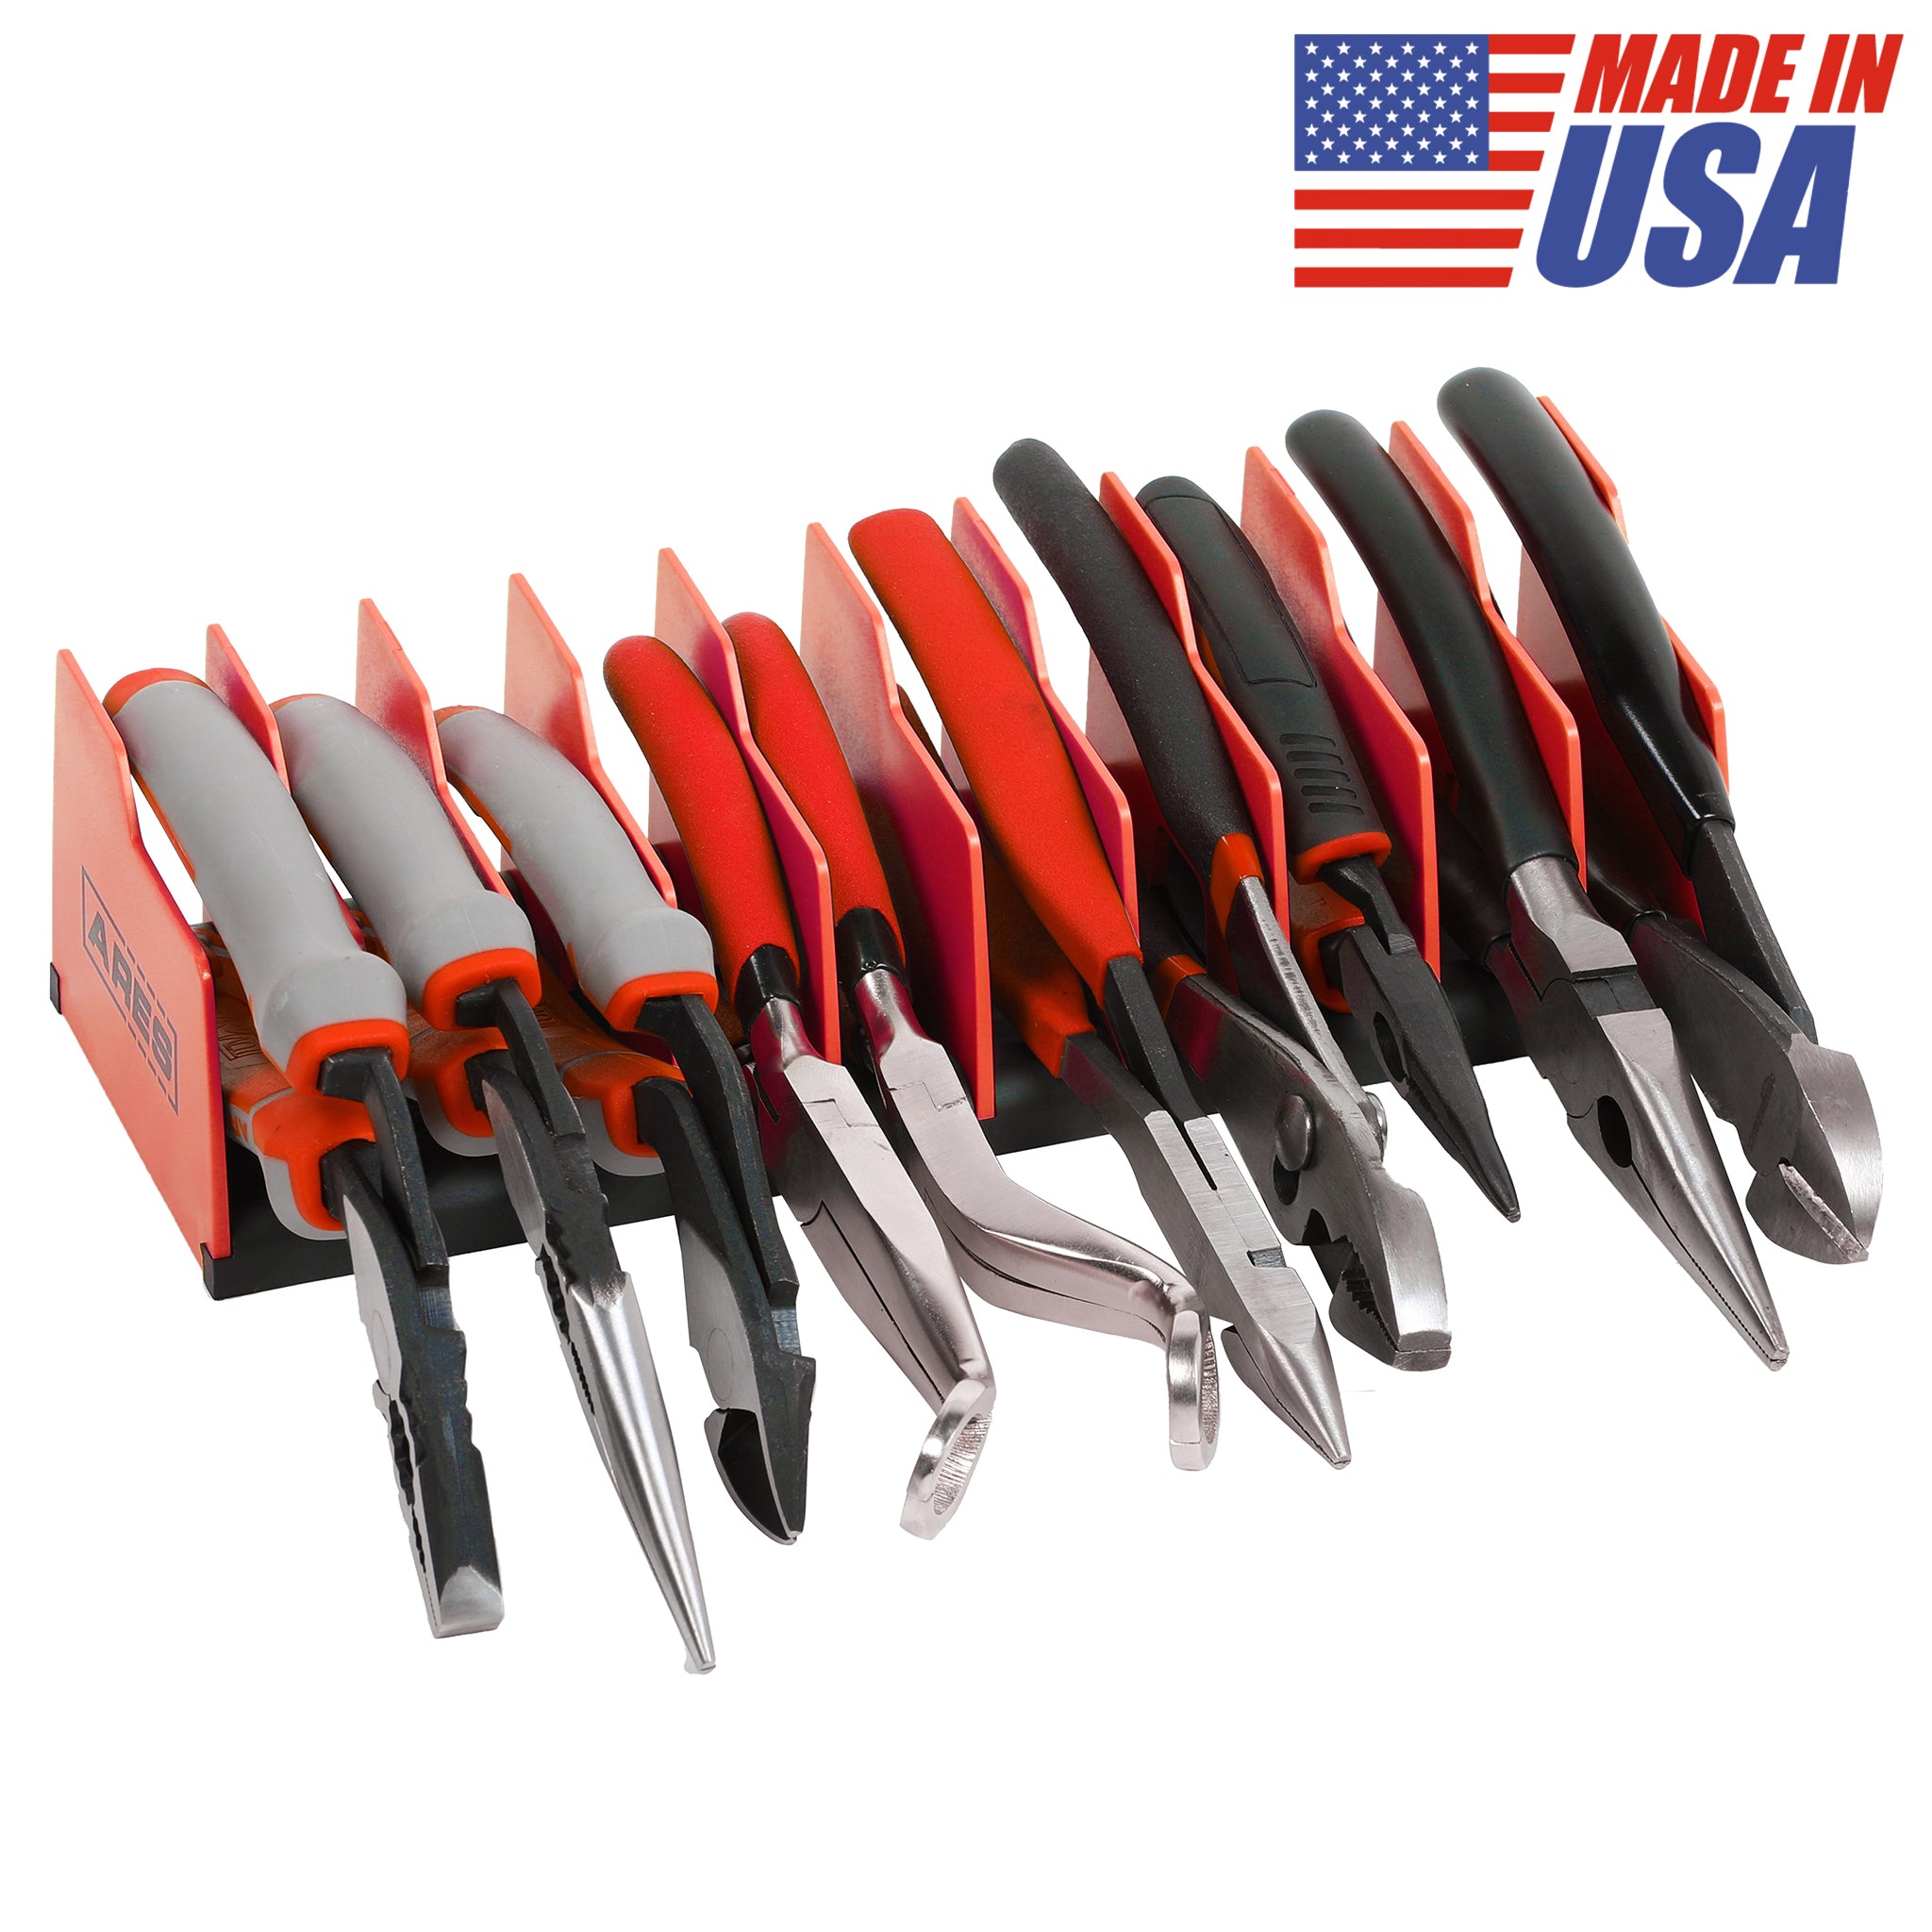 Wall tool holders for Pliers, Chisels, Hammers, Drills